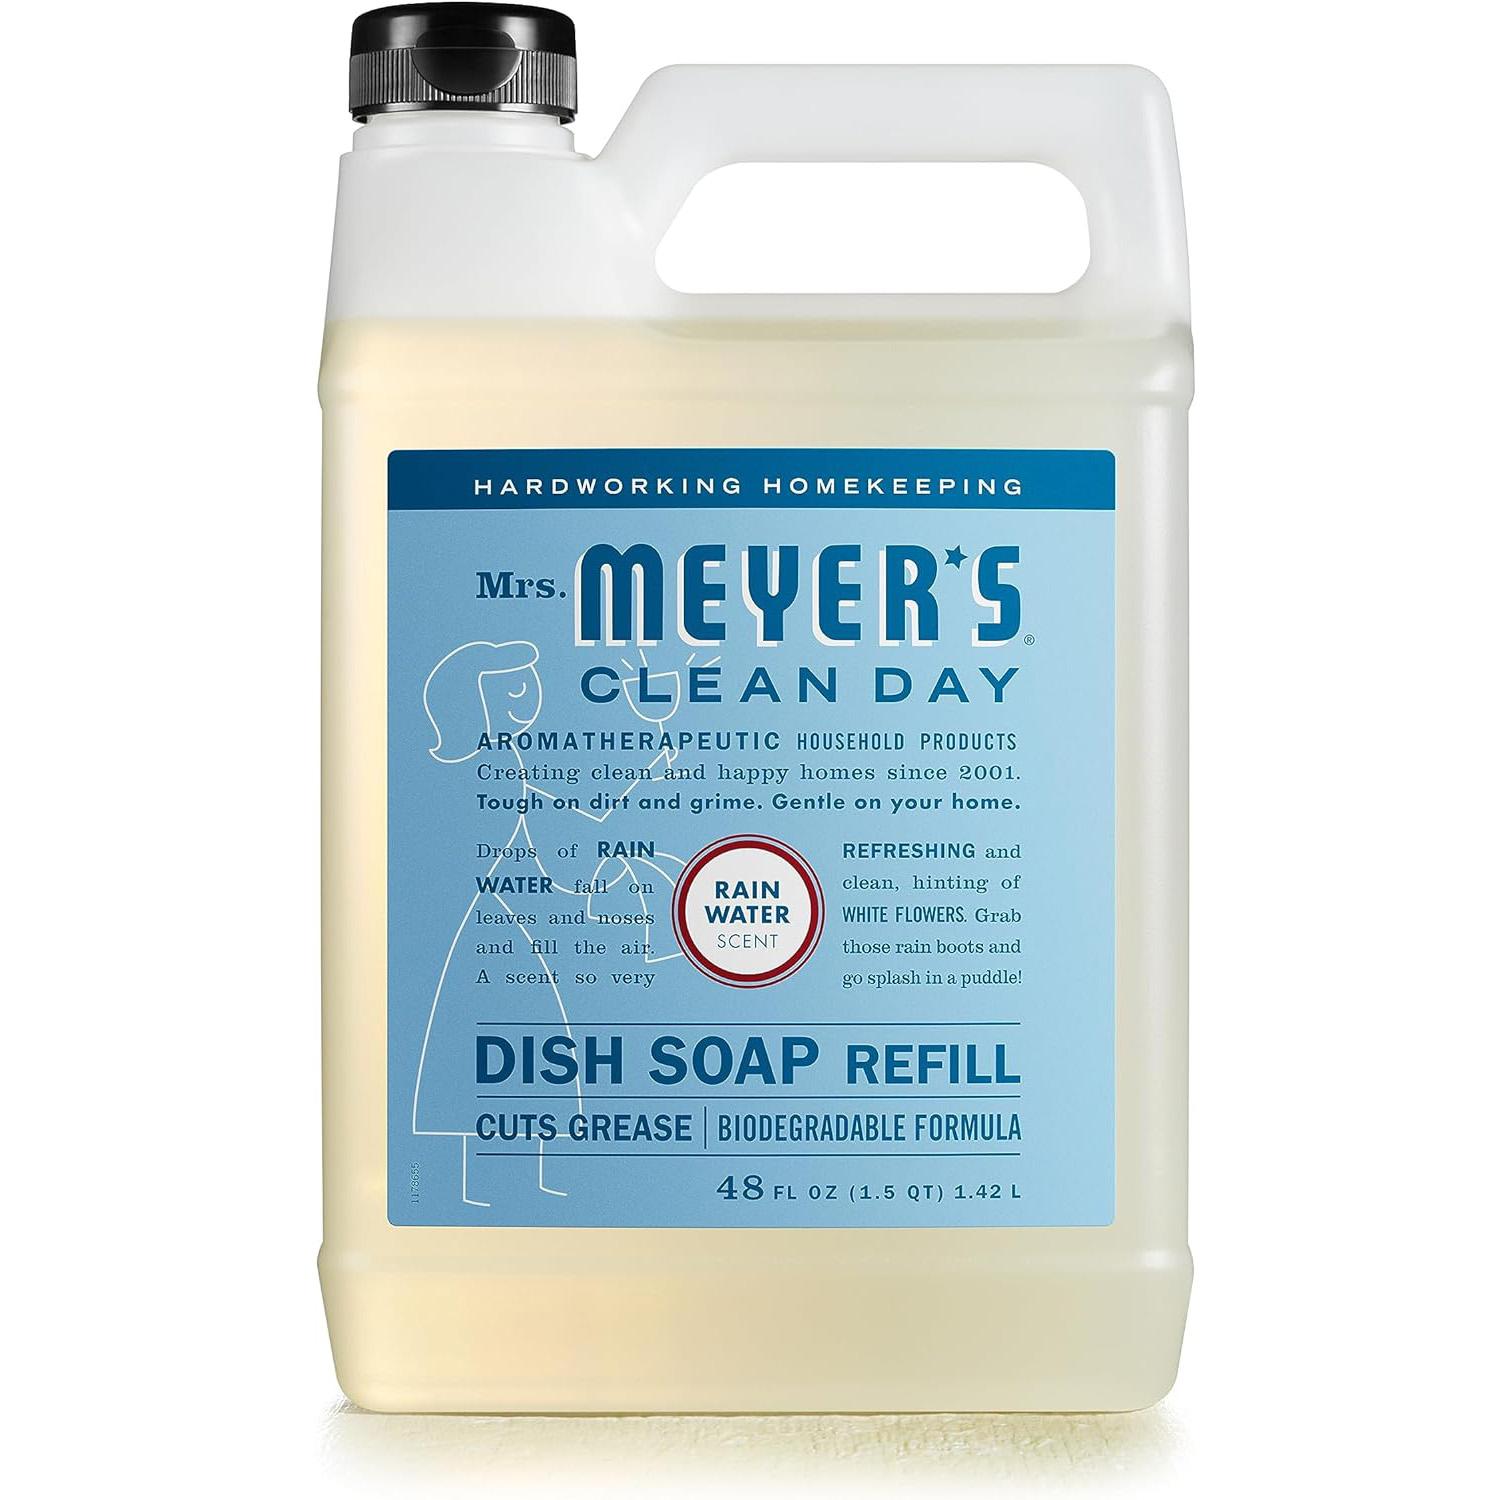 Mrs Meyers Clean Day Liquid Dish Soap Refill 48oz for $7.63